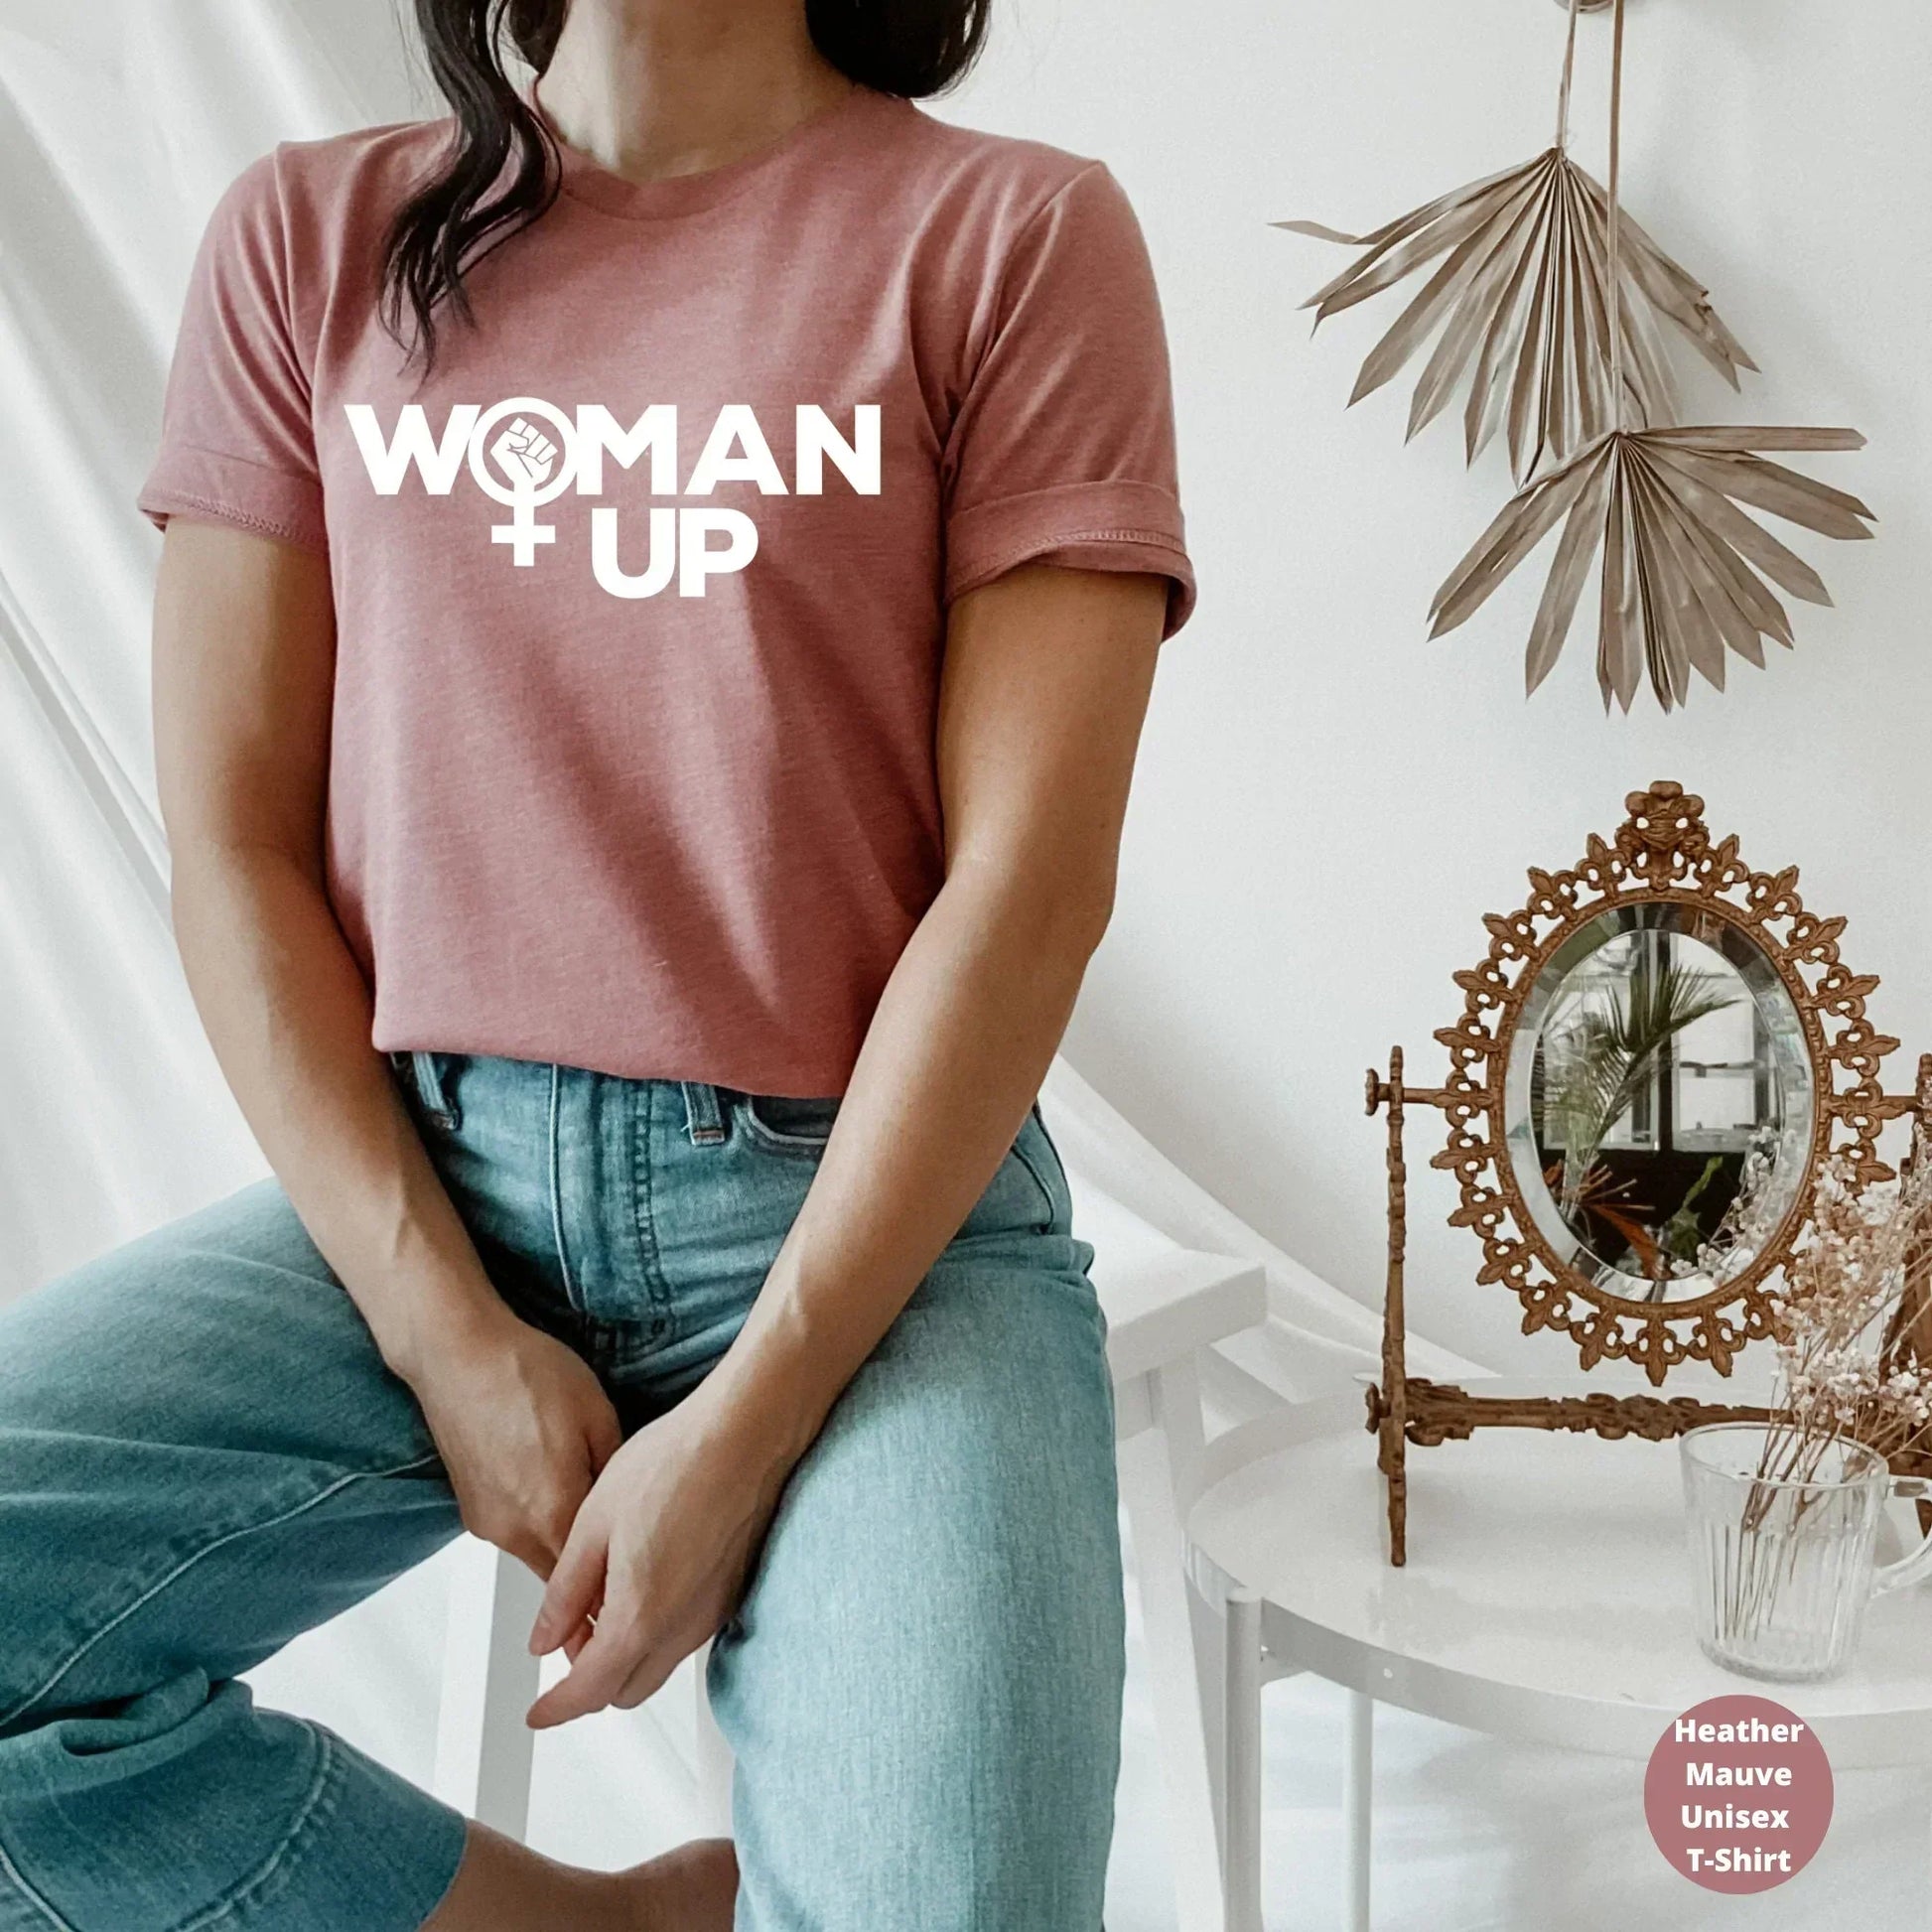 Woman Up T-shirt, Protest T-Shirt, Empower Women Rights, Female Pro Choice Shirt, Roe v Wade, Activist, Equality Sweatshirt, Feminist Hoodie